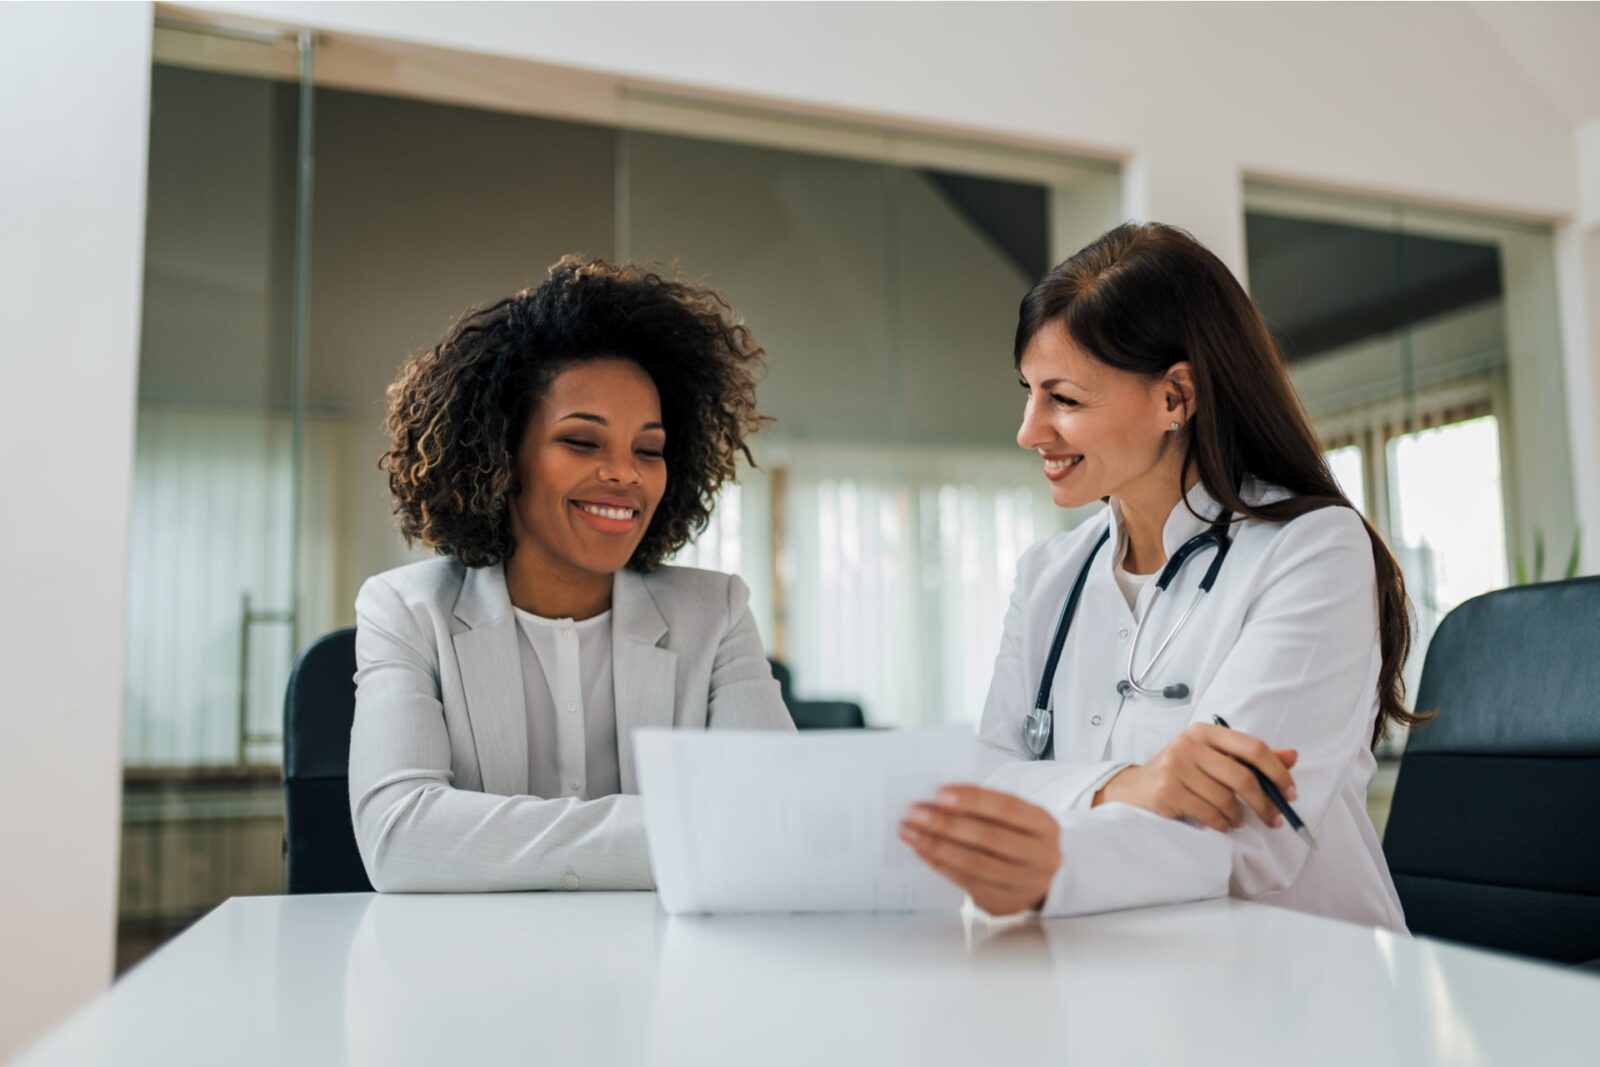 Smiling female patient and doctor looking at paper document.